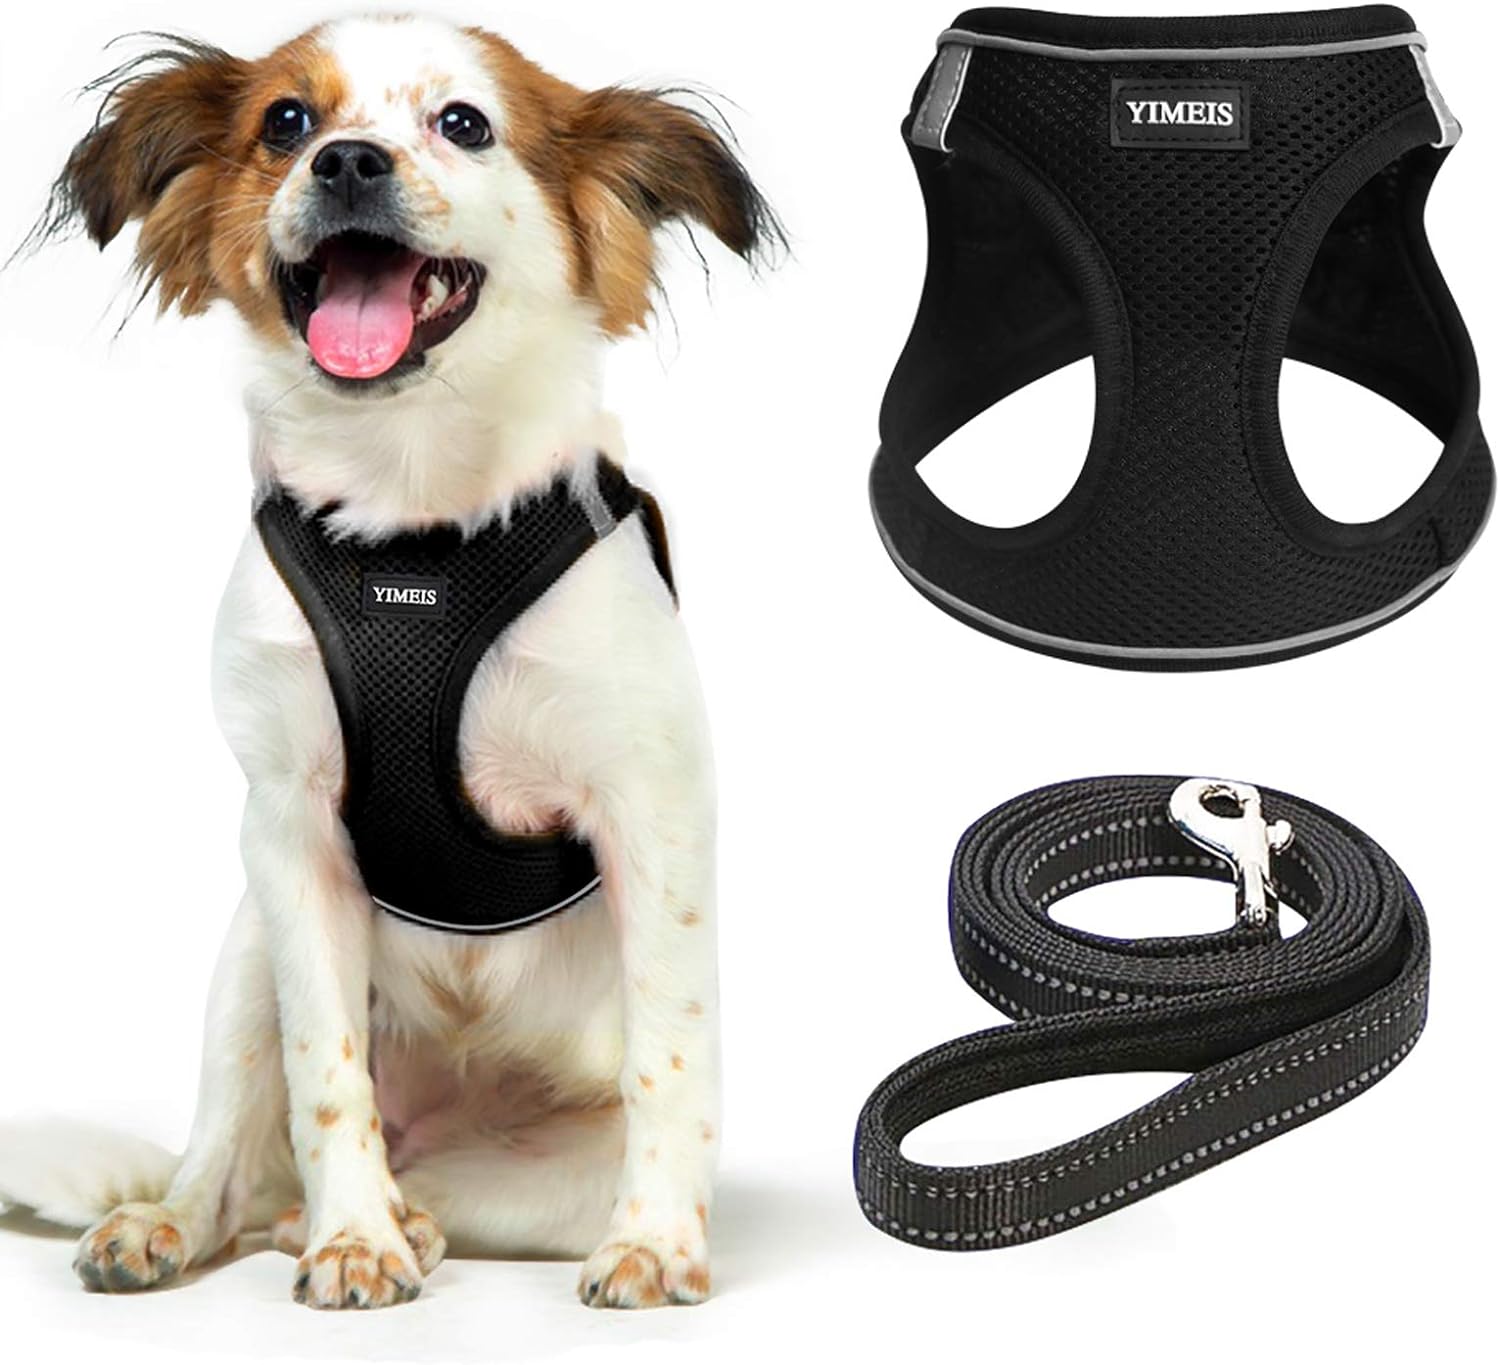 YIMEIS Dog Harness and Leash Set, No Pull Soft Mesh Pet Harness, Reflective Adjustable Puppy Vest for Small Dogs, Cats (M, Black) fit Small